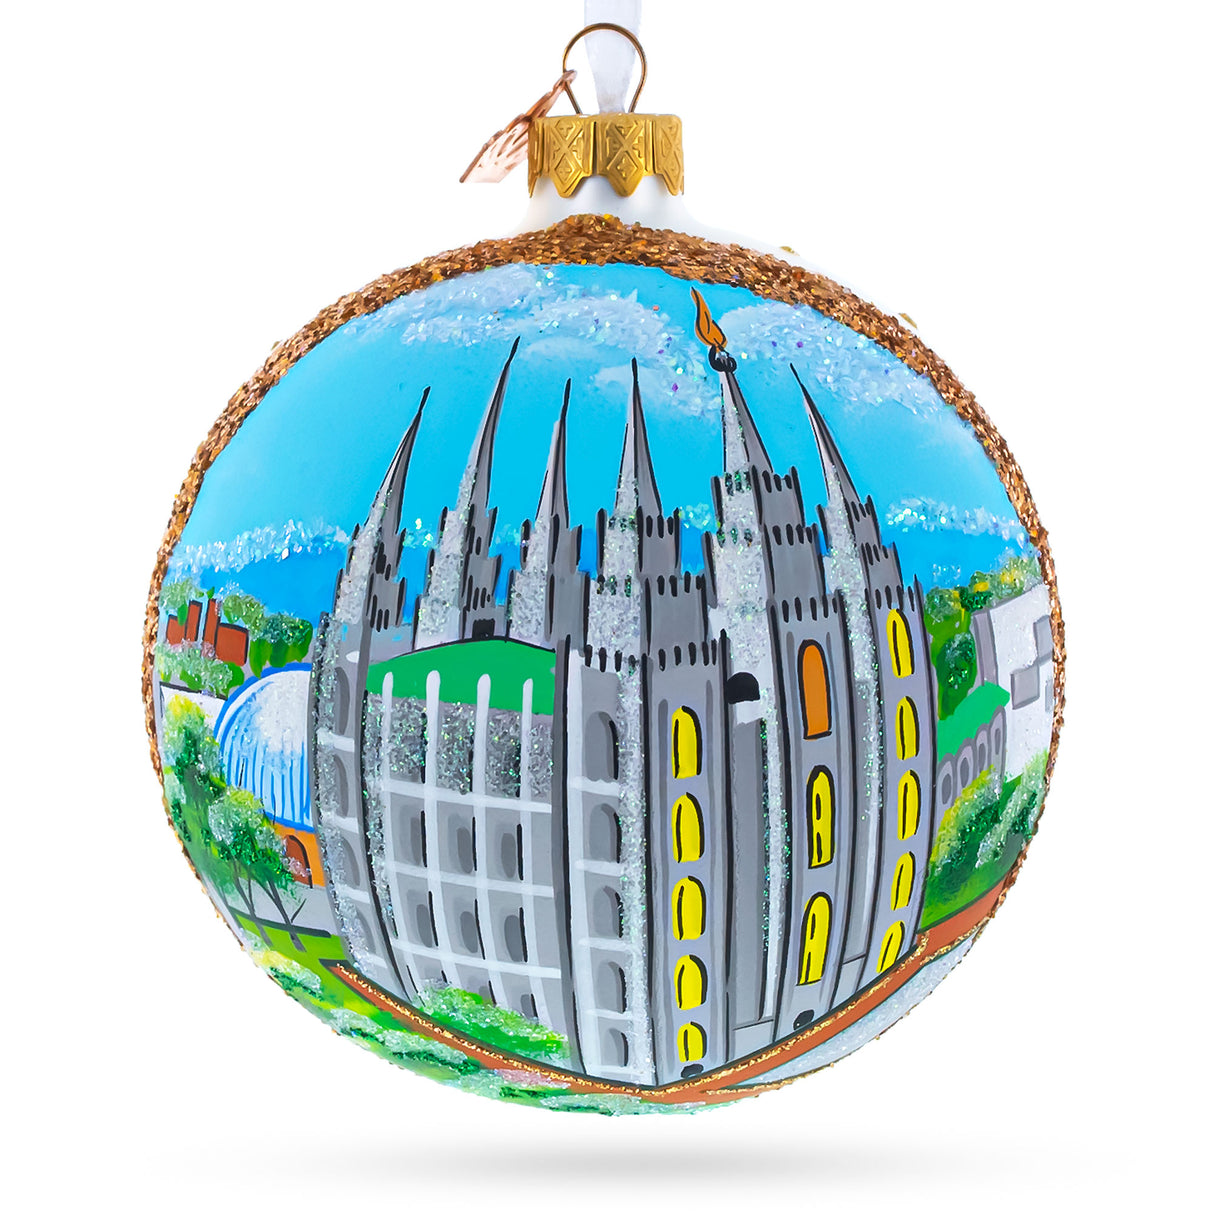 Glass Temple Square, Salt Lake City, Utah, USA Glass Ball Christmas Ornament 4 Inches in Multi color Round